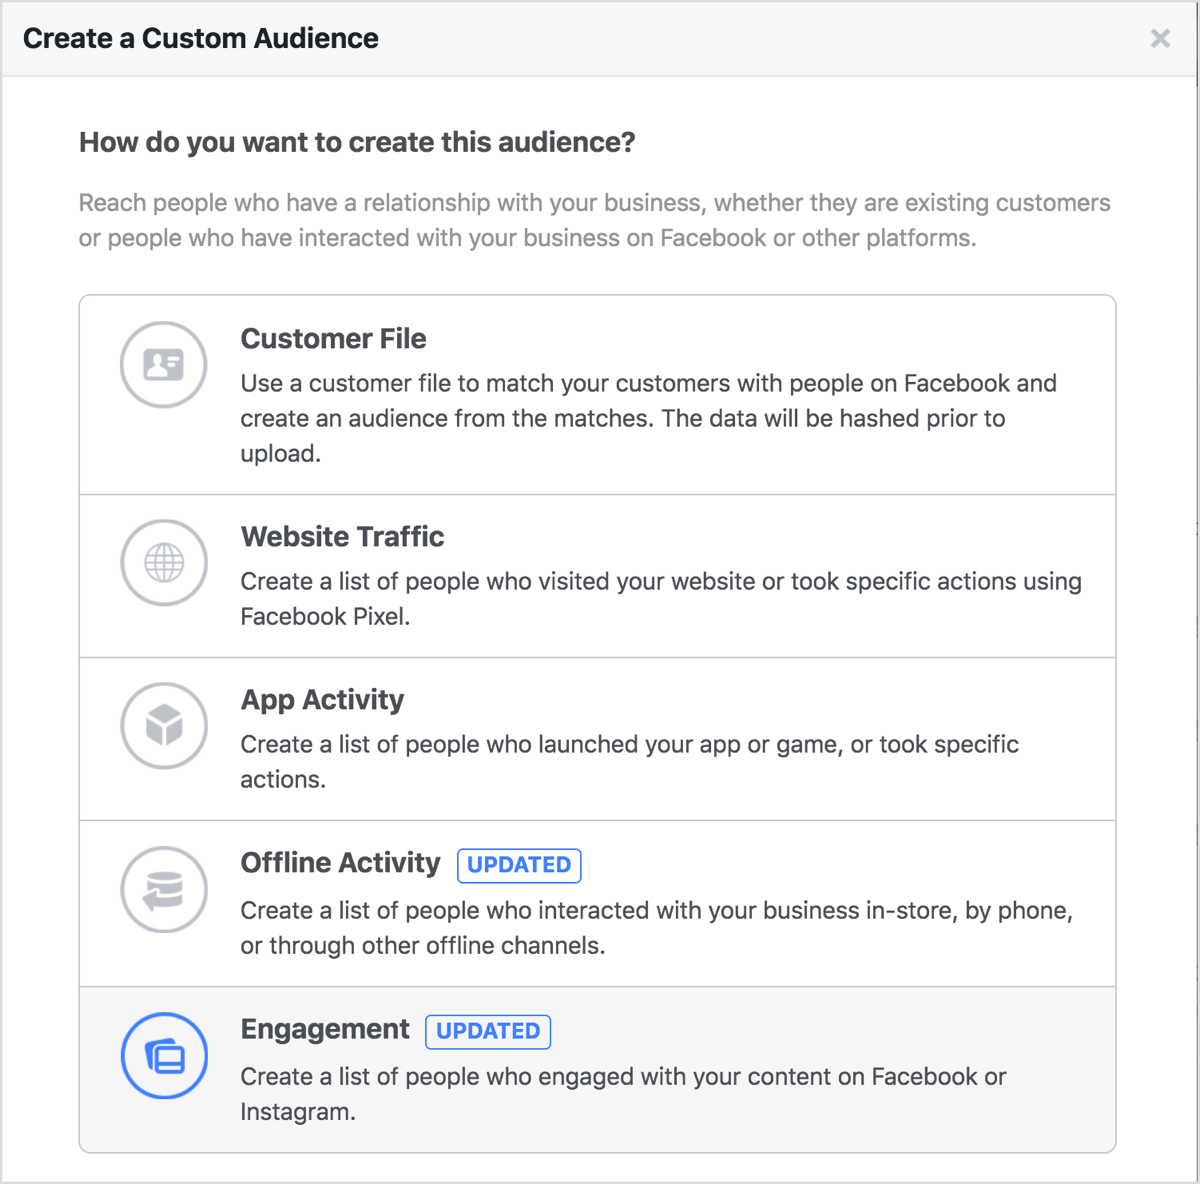 When you reach the How Do You Want to Create This Audience screen, select Engagement.